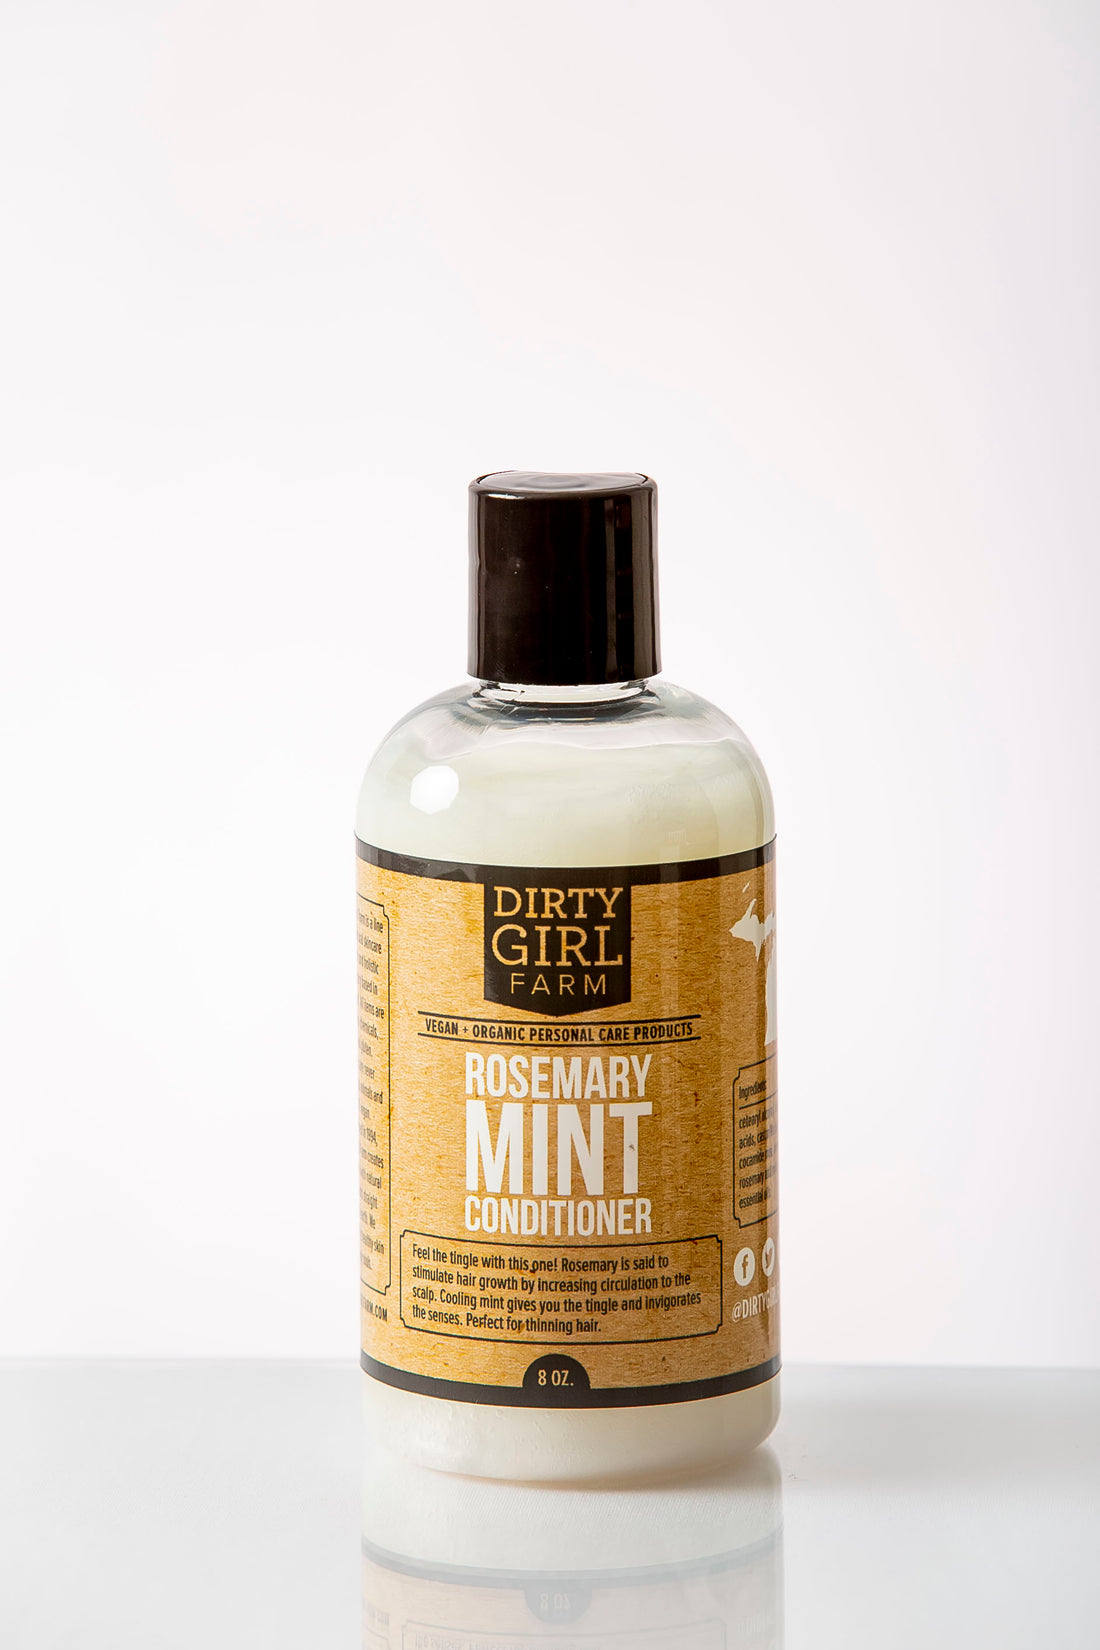 Dirty Girl Farm Rosemary Mint Conditioner